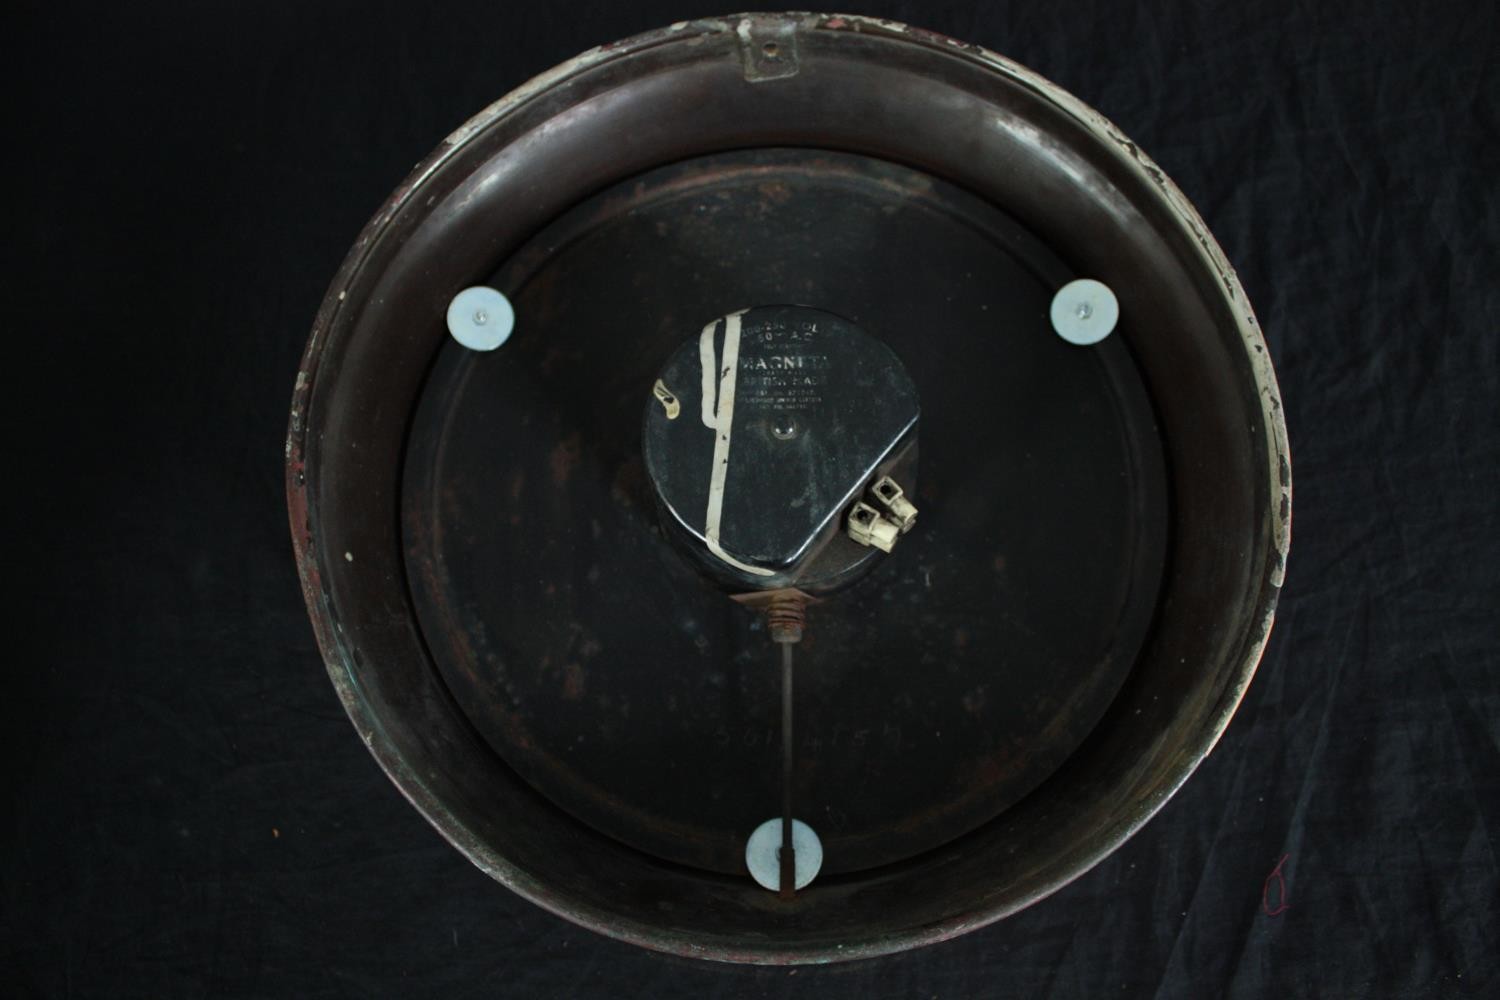 Magneta Electric London. Wall clock. Mains power supply operated. 200 250v. Probably 1940's but - Image 4 of 4